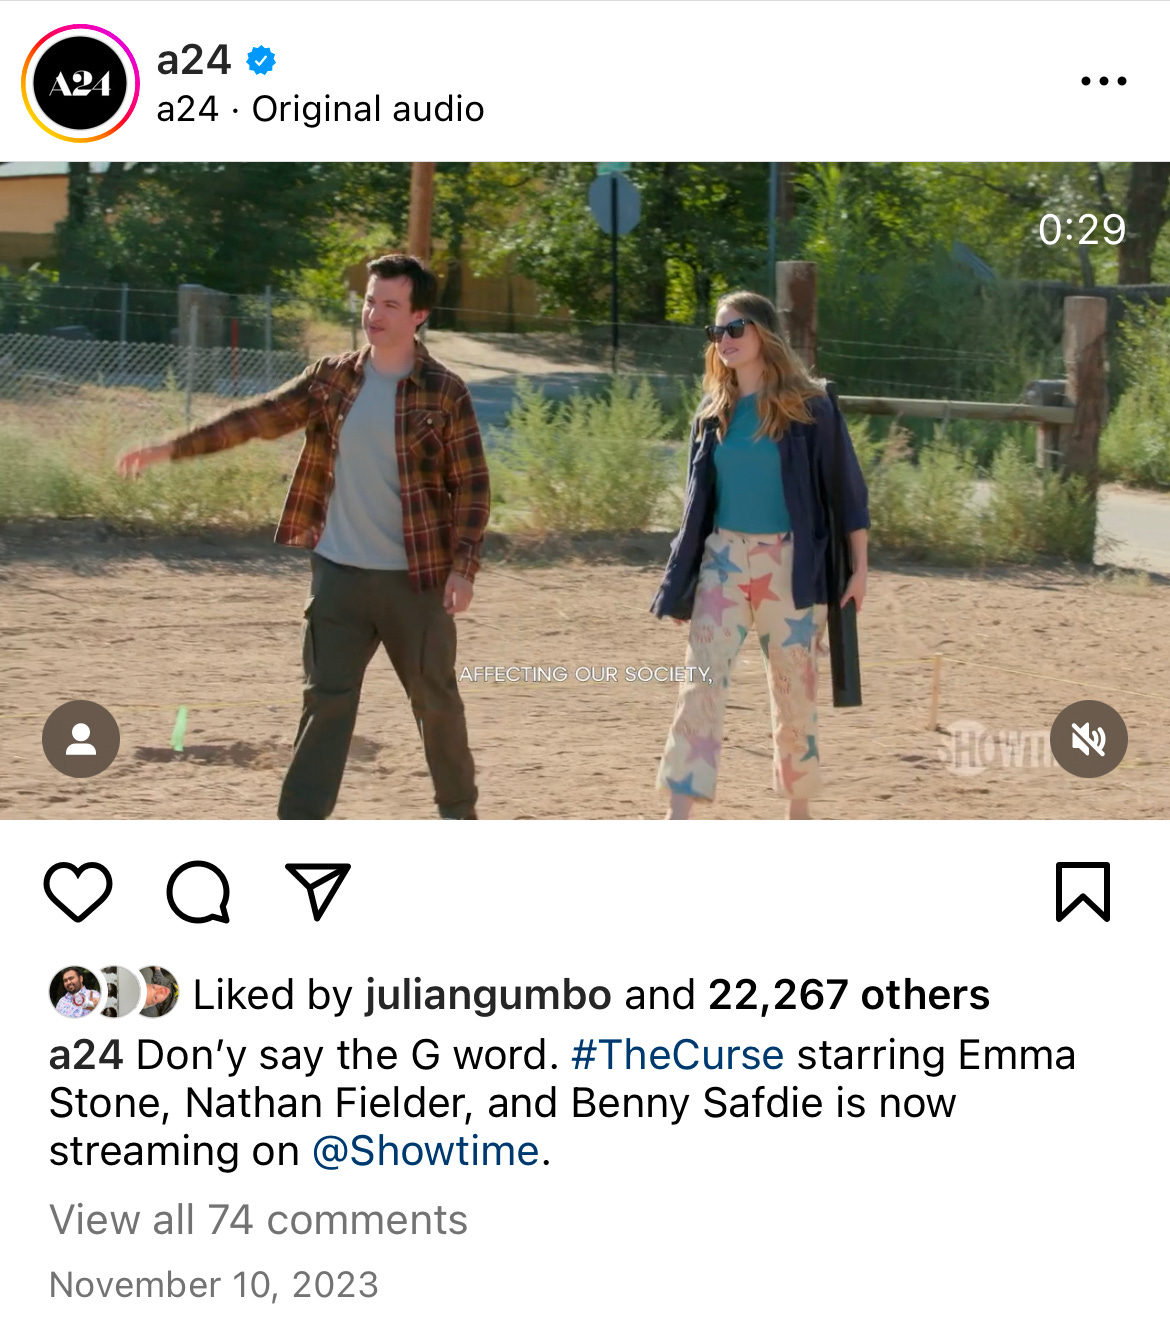 Post from A24 on Instagram that says "Don’y say the G word. #TheCurse starring Emma Stone, Nathan Fielder, and Benny Safdie is now streaming on @Showtime."